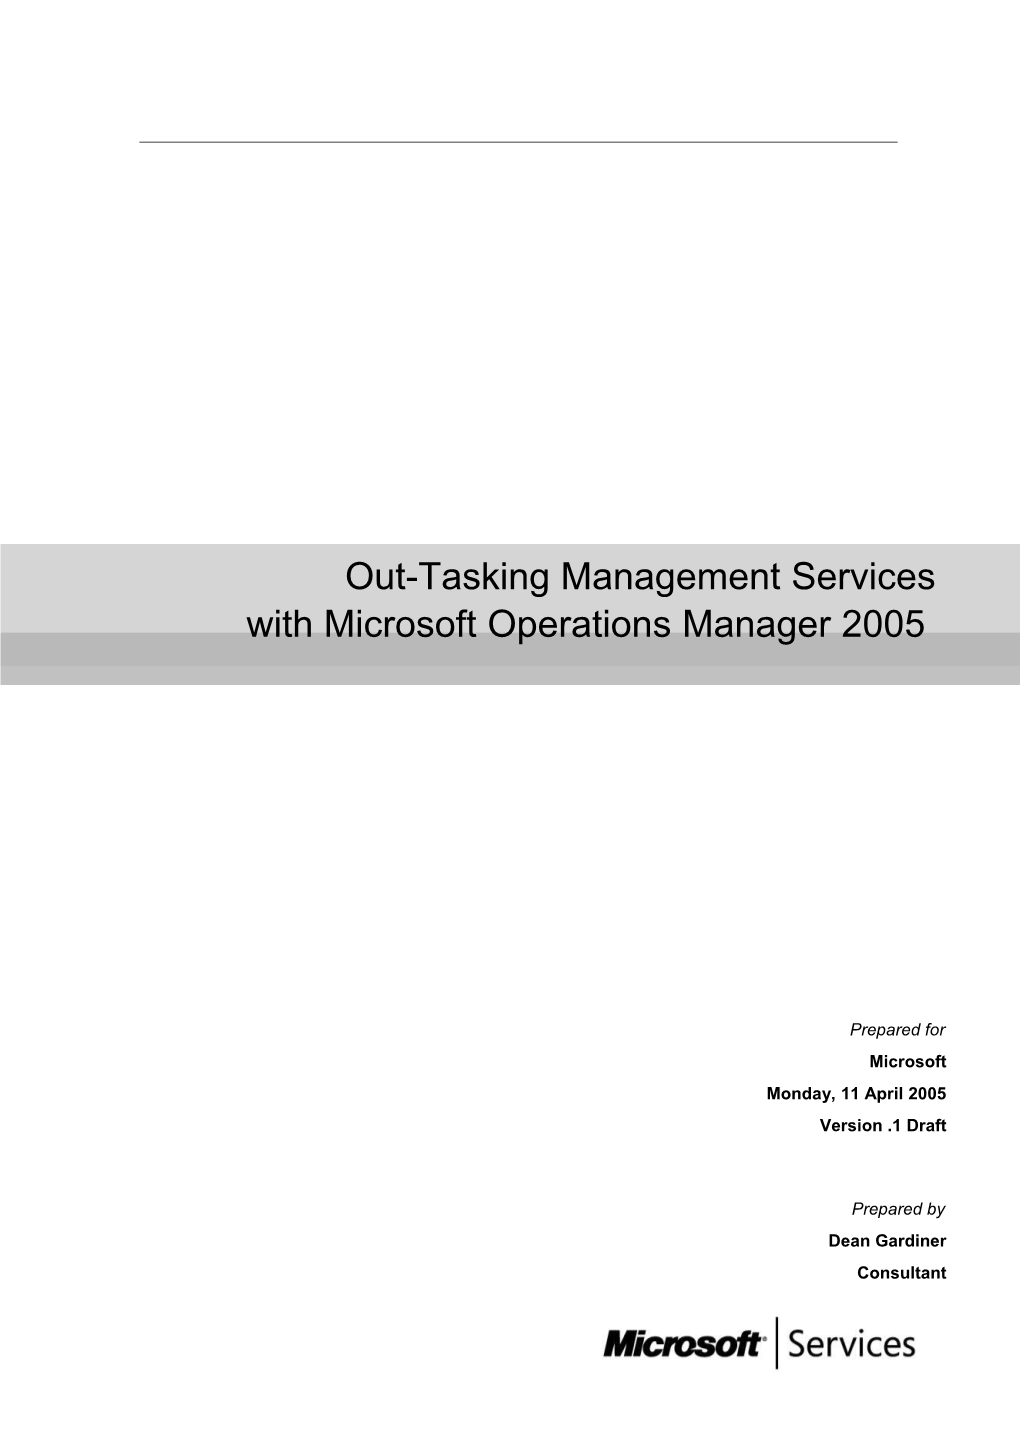 Outtasking Managed Services